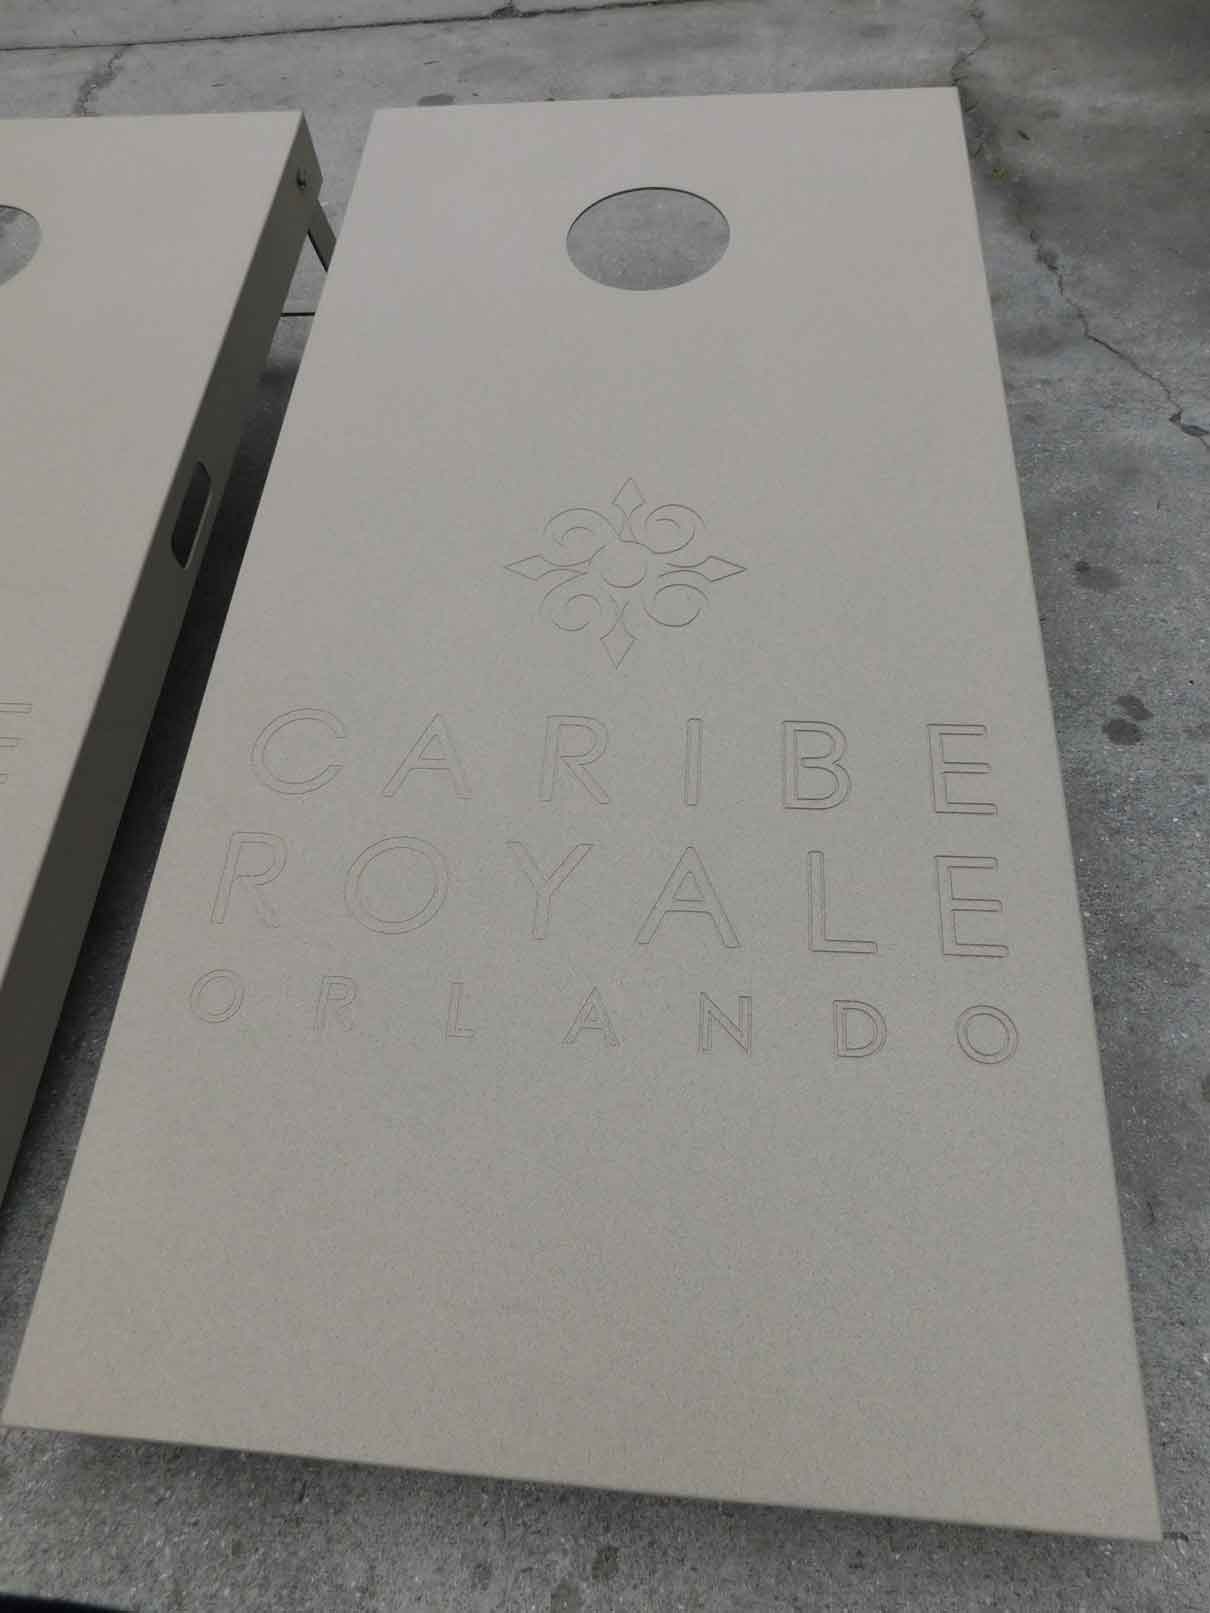 Caribe Royale Hotel in Orlando, Florida's custom, engraved cornhole set made by R&R Outdoors All Weather Billiards